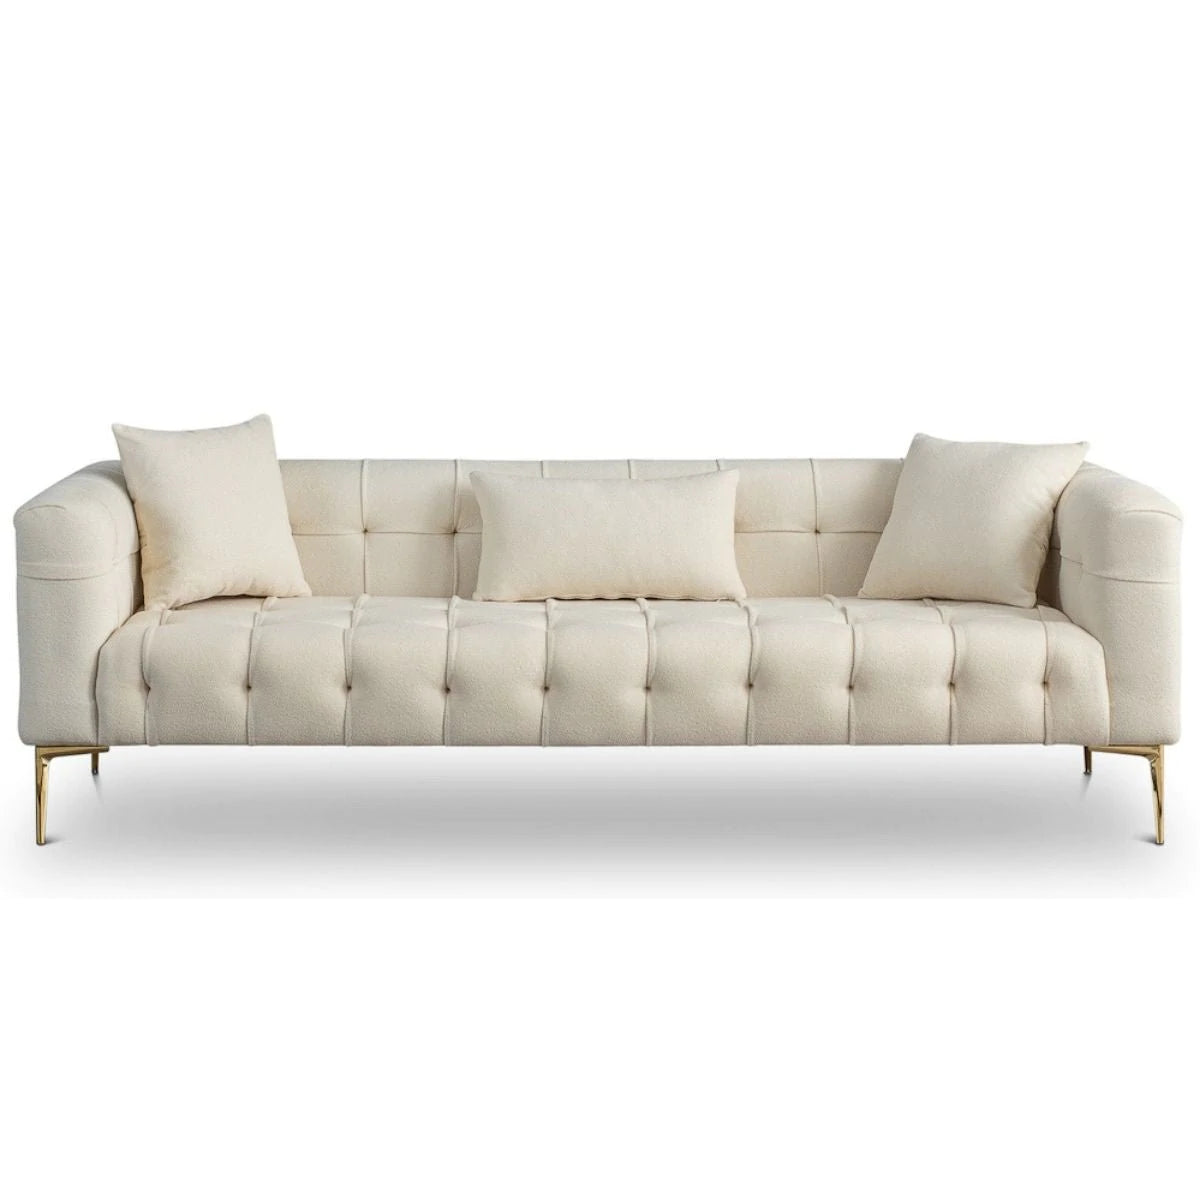 Modern Contemporary Rectangular French Boucle Upholstered Sofa in Beige